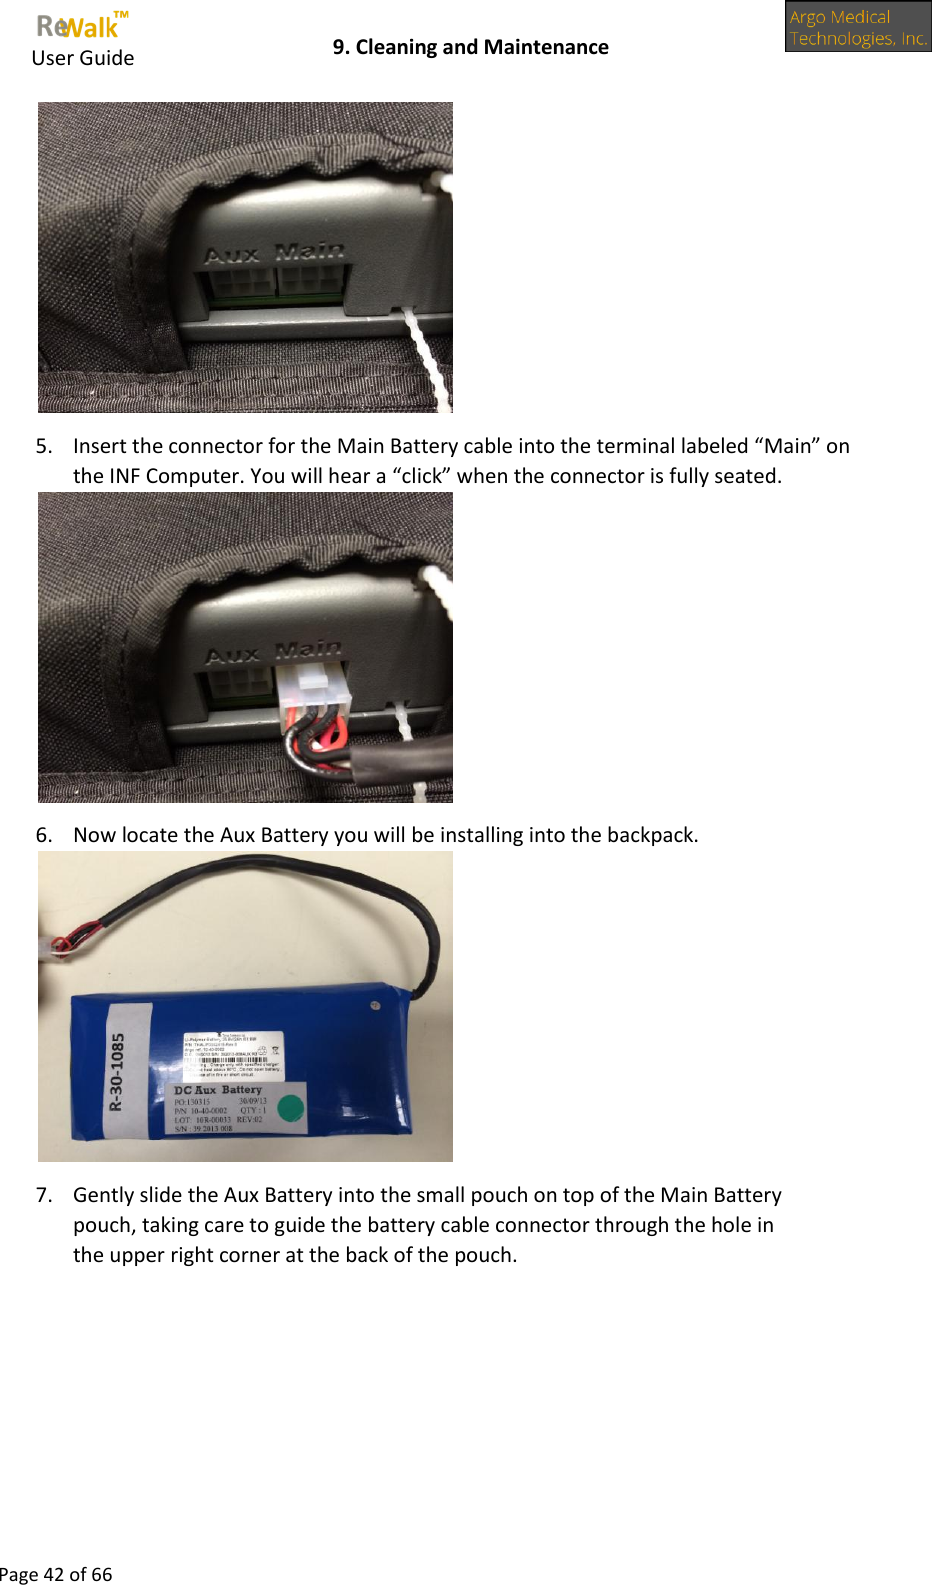     User Guide    9. Cleaning and Maintenance  Page 42 of 66   5. Insert the connector for the Main Battery cable into the terminal labeled “Main” on the INF Computer. You will hear a “click” when the connector is fully seated.  6. Now locate the Aux Battery you will be installing into the backpack.  7. Gently slide the Aux Battery into the small pouch on top of the Main Battery pouch, taking care to guide the battery cable connector through the hole in the upper right corner at the back of the pouch. 